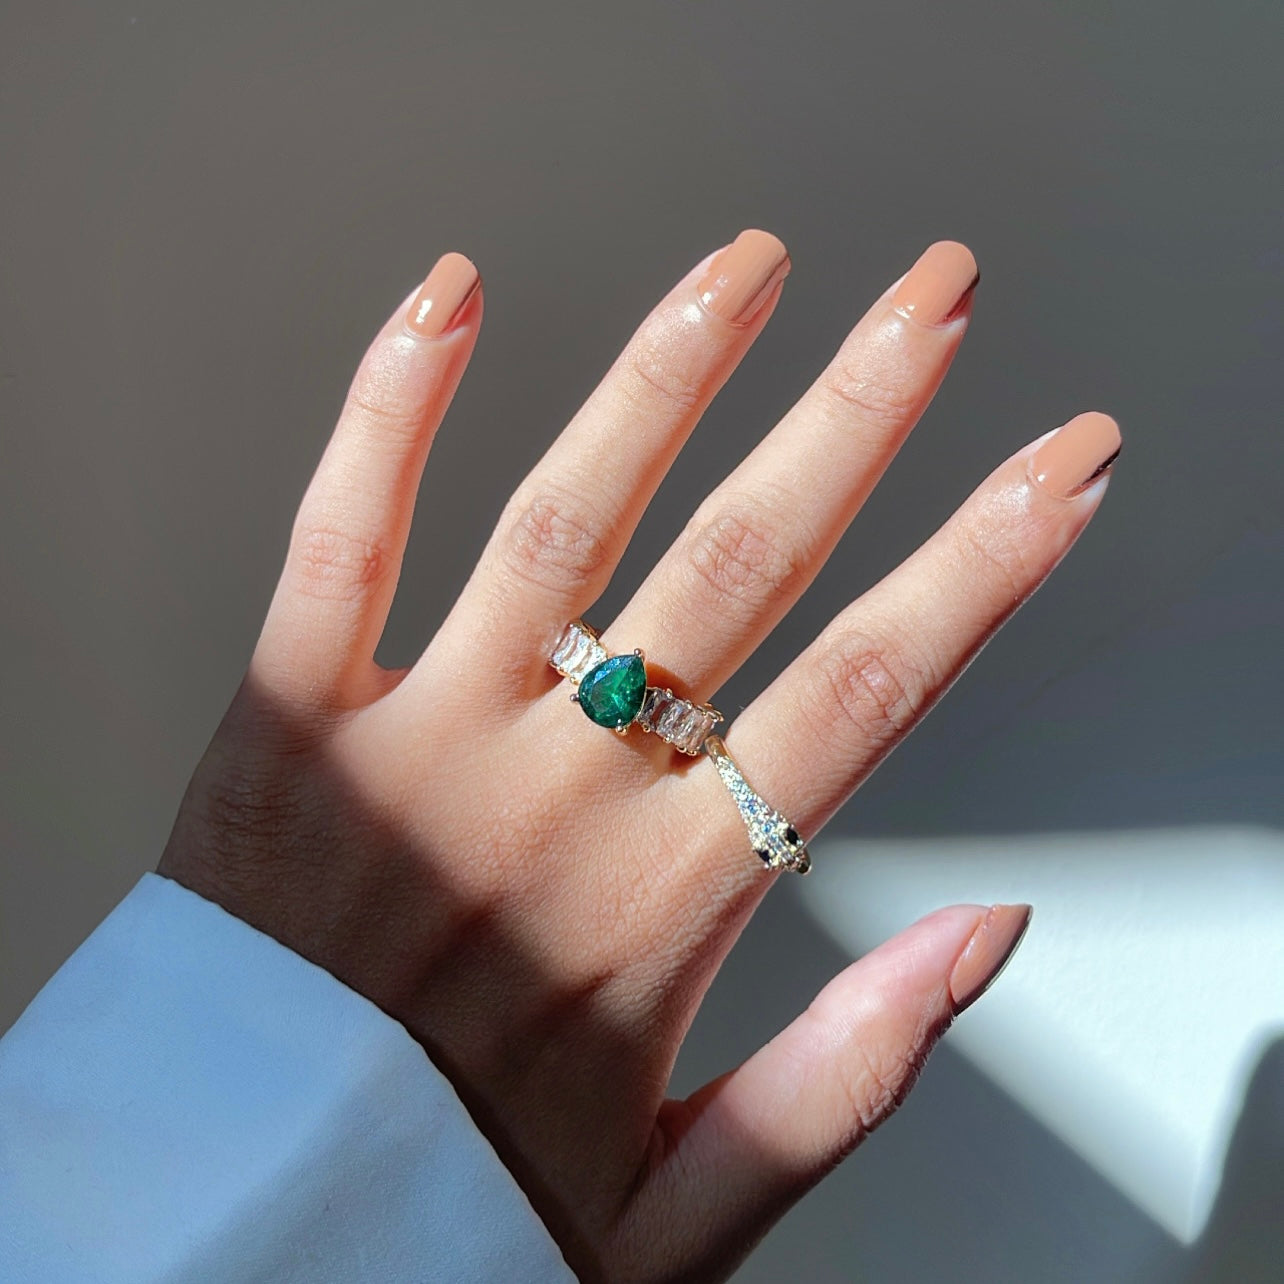 Muse ring - Ladywithcraft